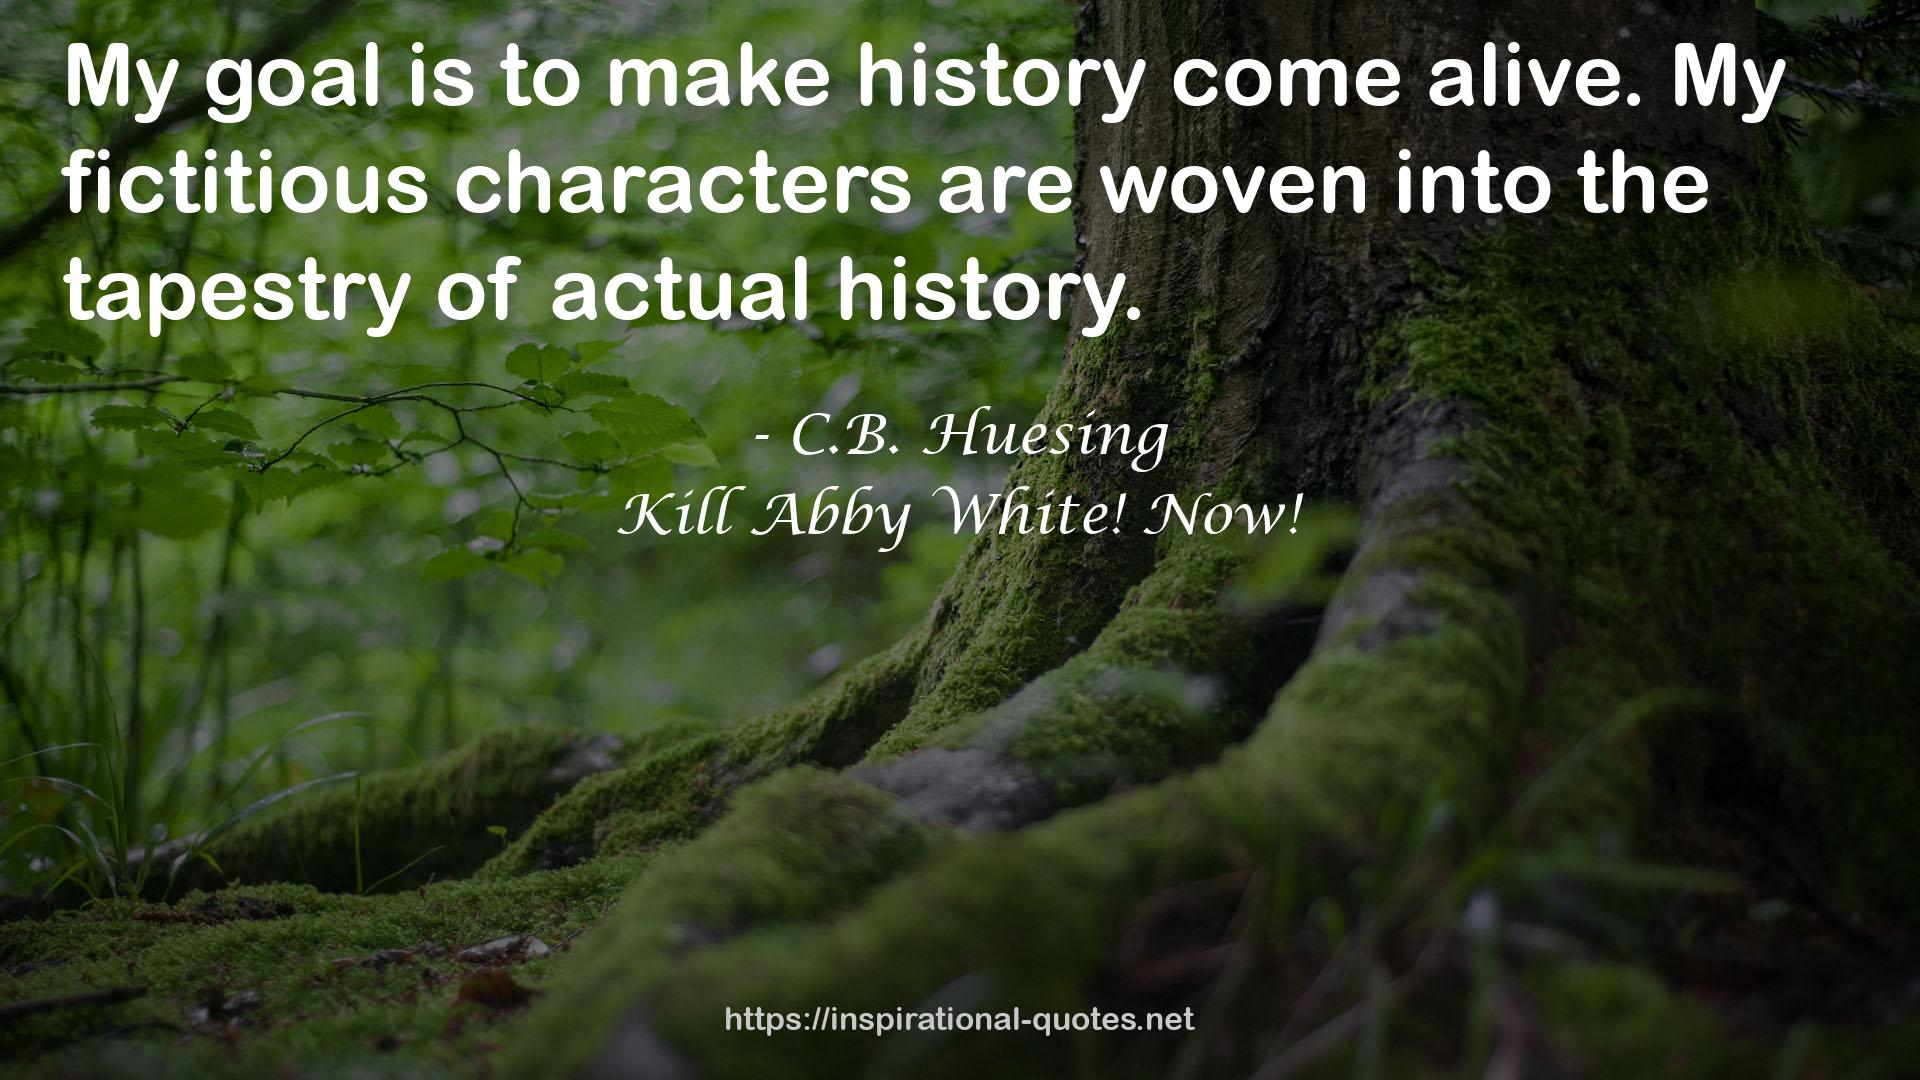 Kill Abby White! Now! QUOTES